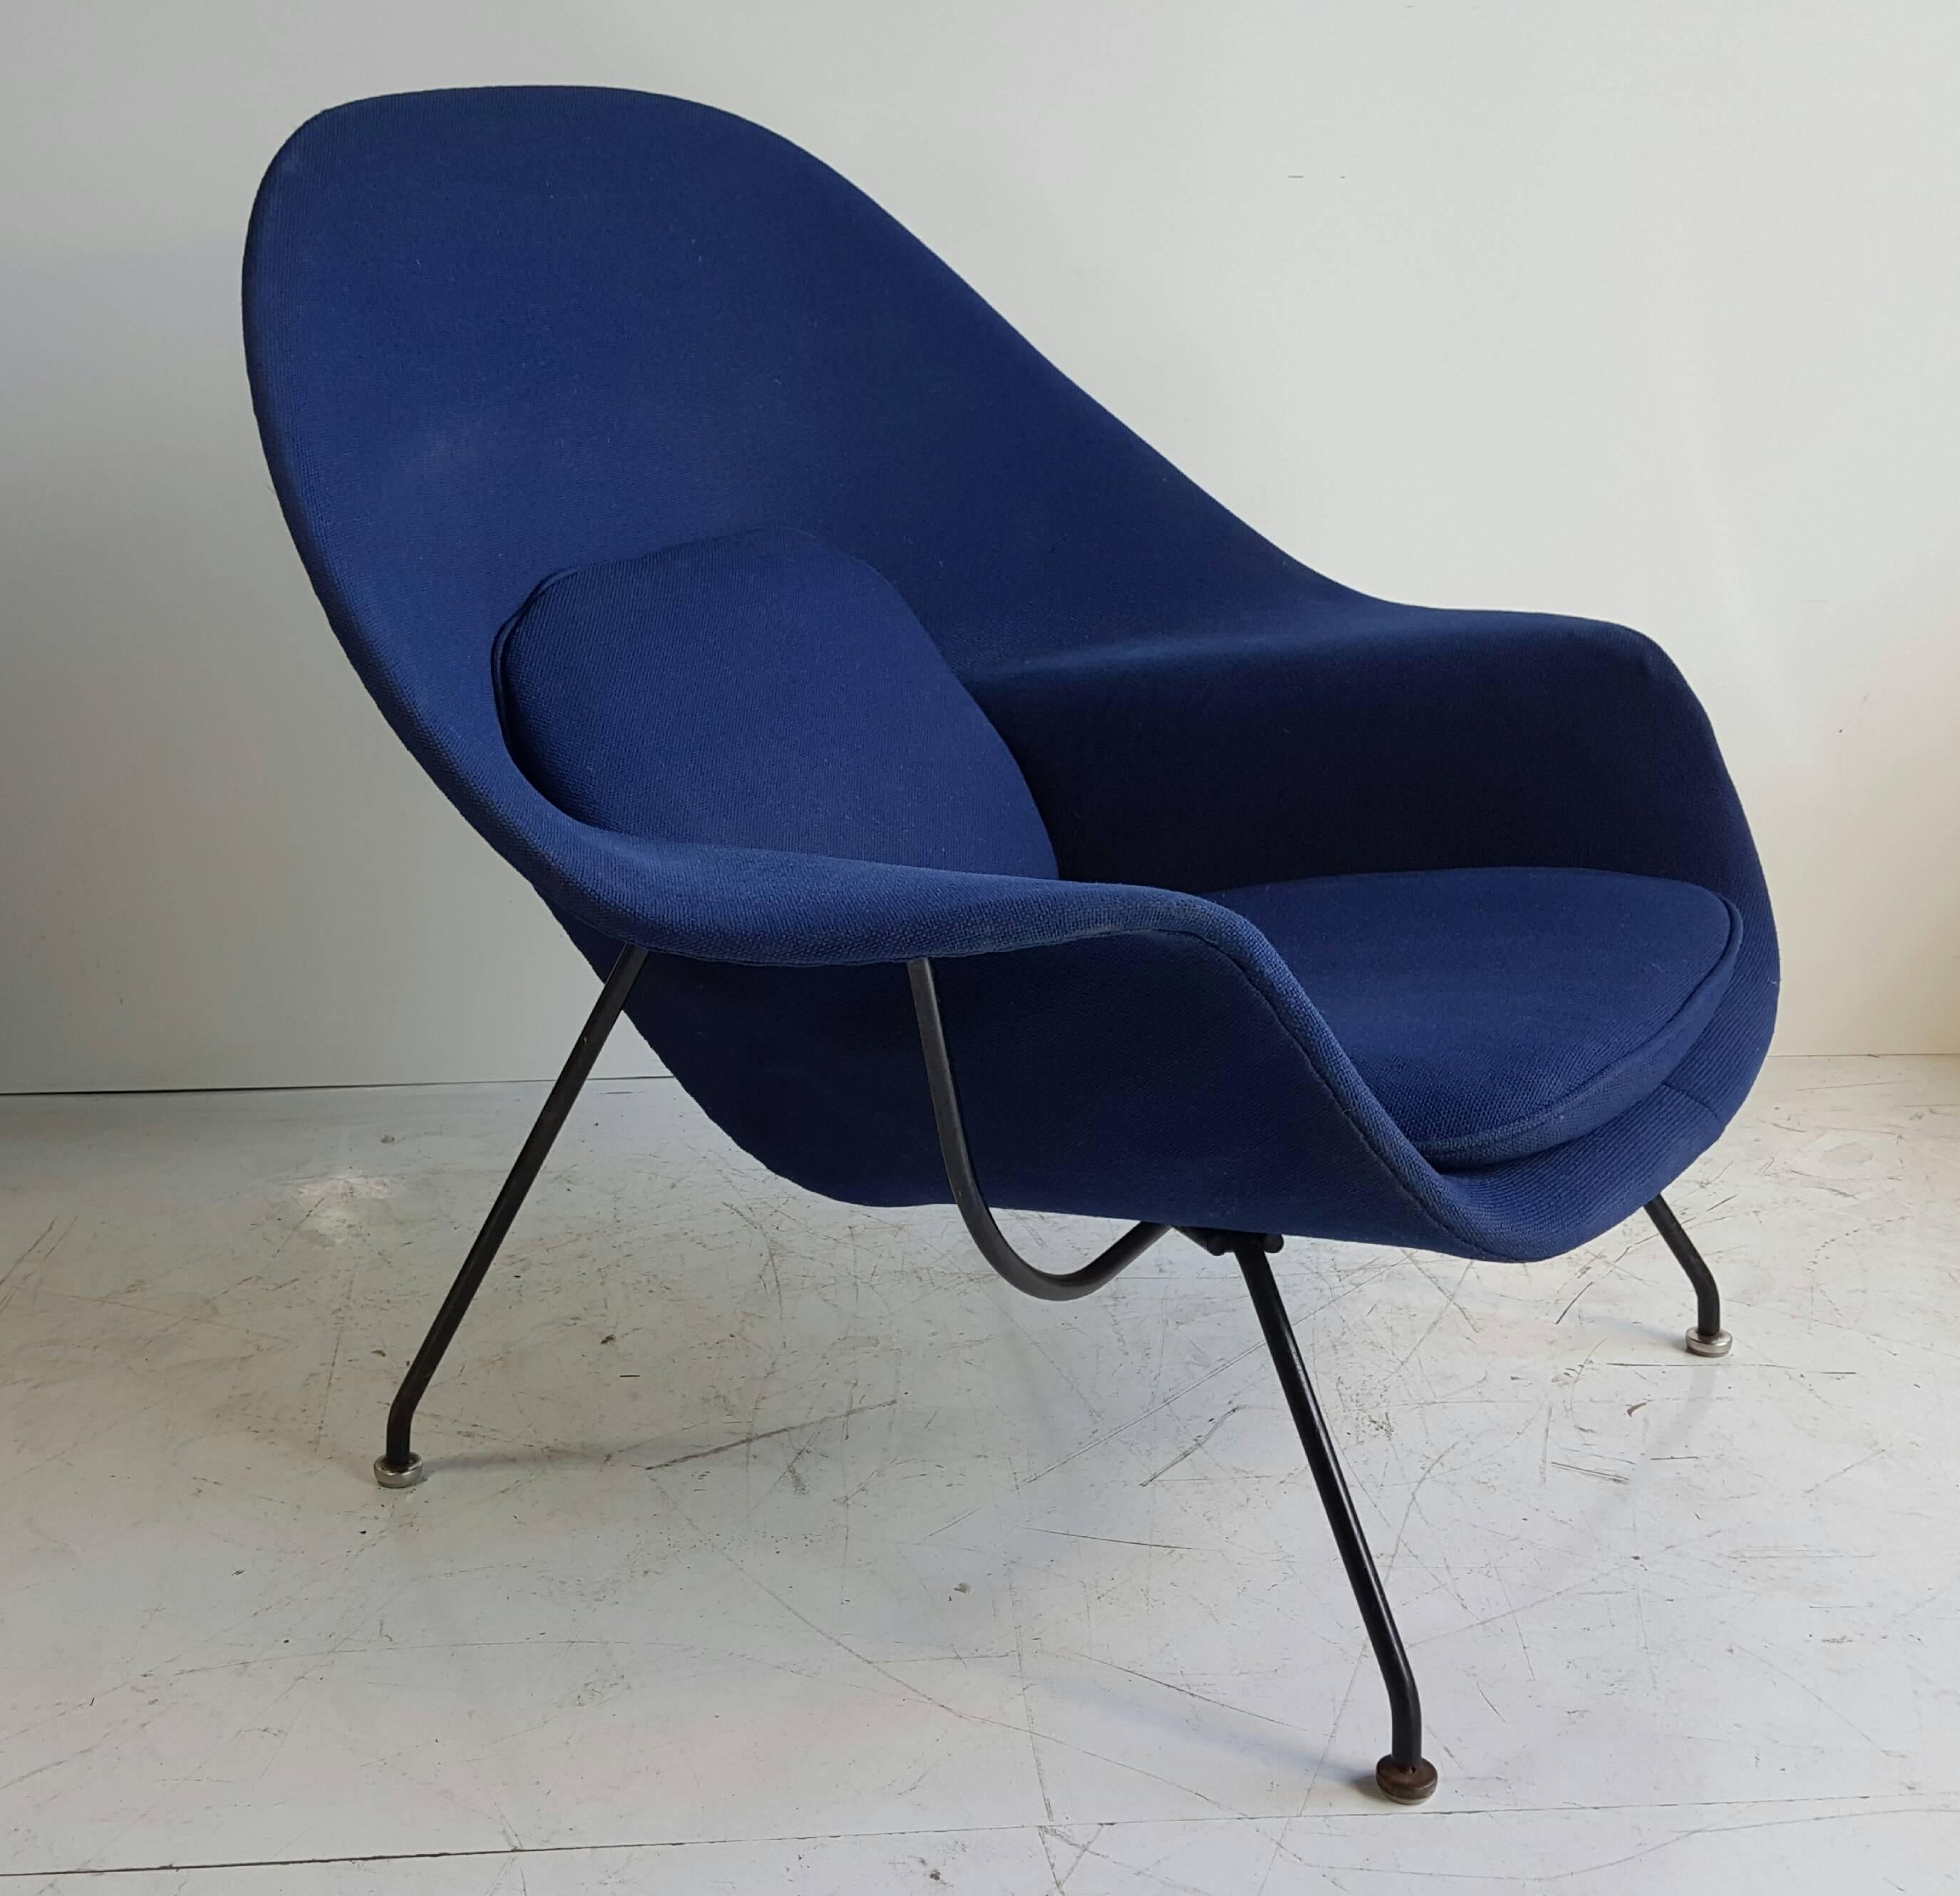 Classic modernist, Eero Saarinen's 'WOMB' chair manufactured by Knoll. Nice early version, heavy black iron base. Retains original royal blue Knoll fabric, overall nice original condition.